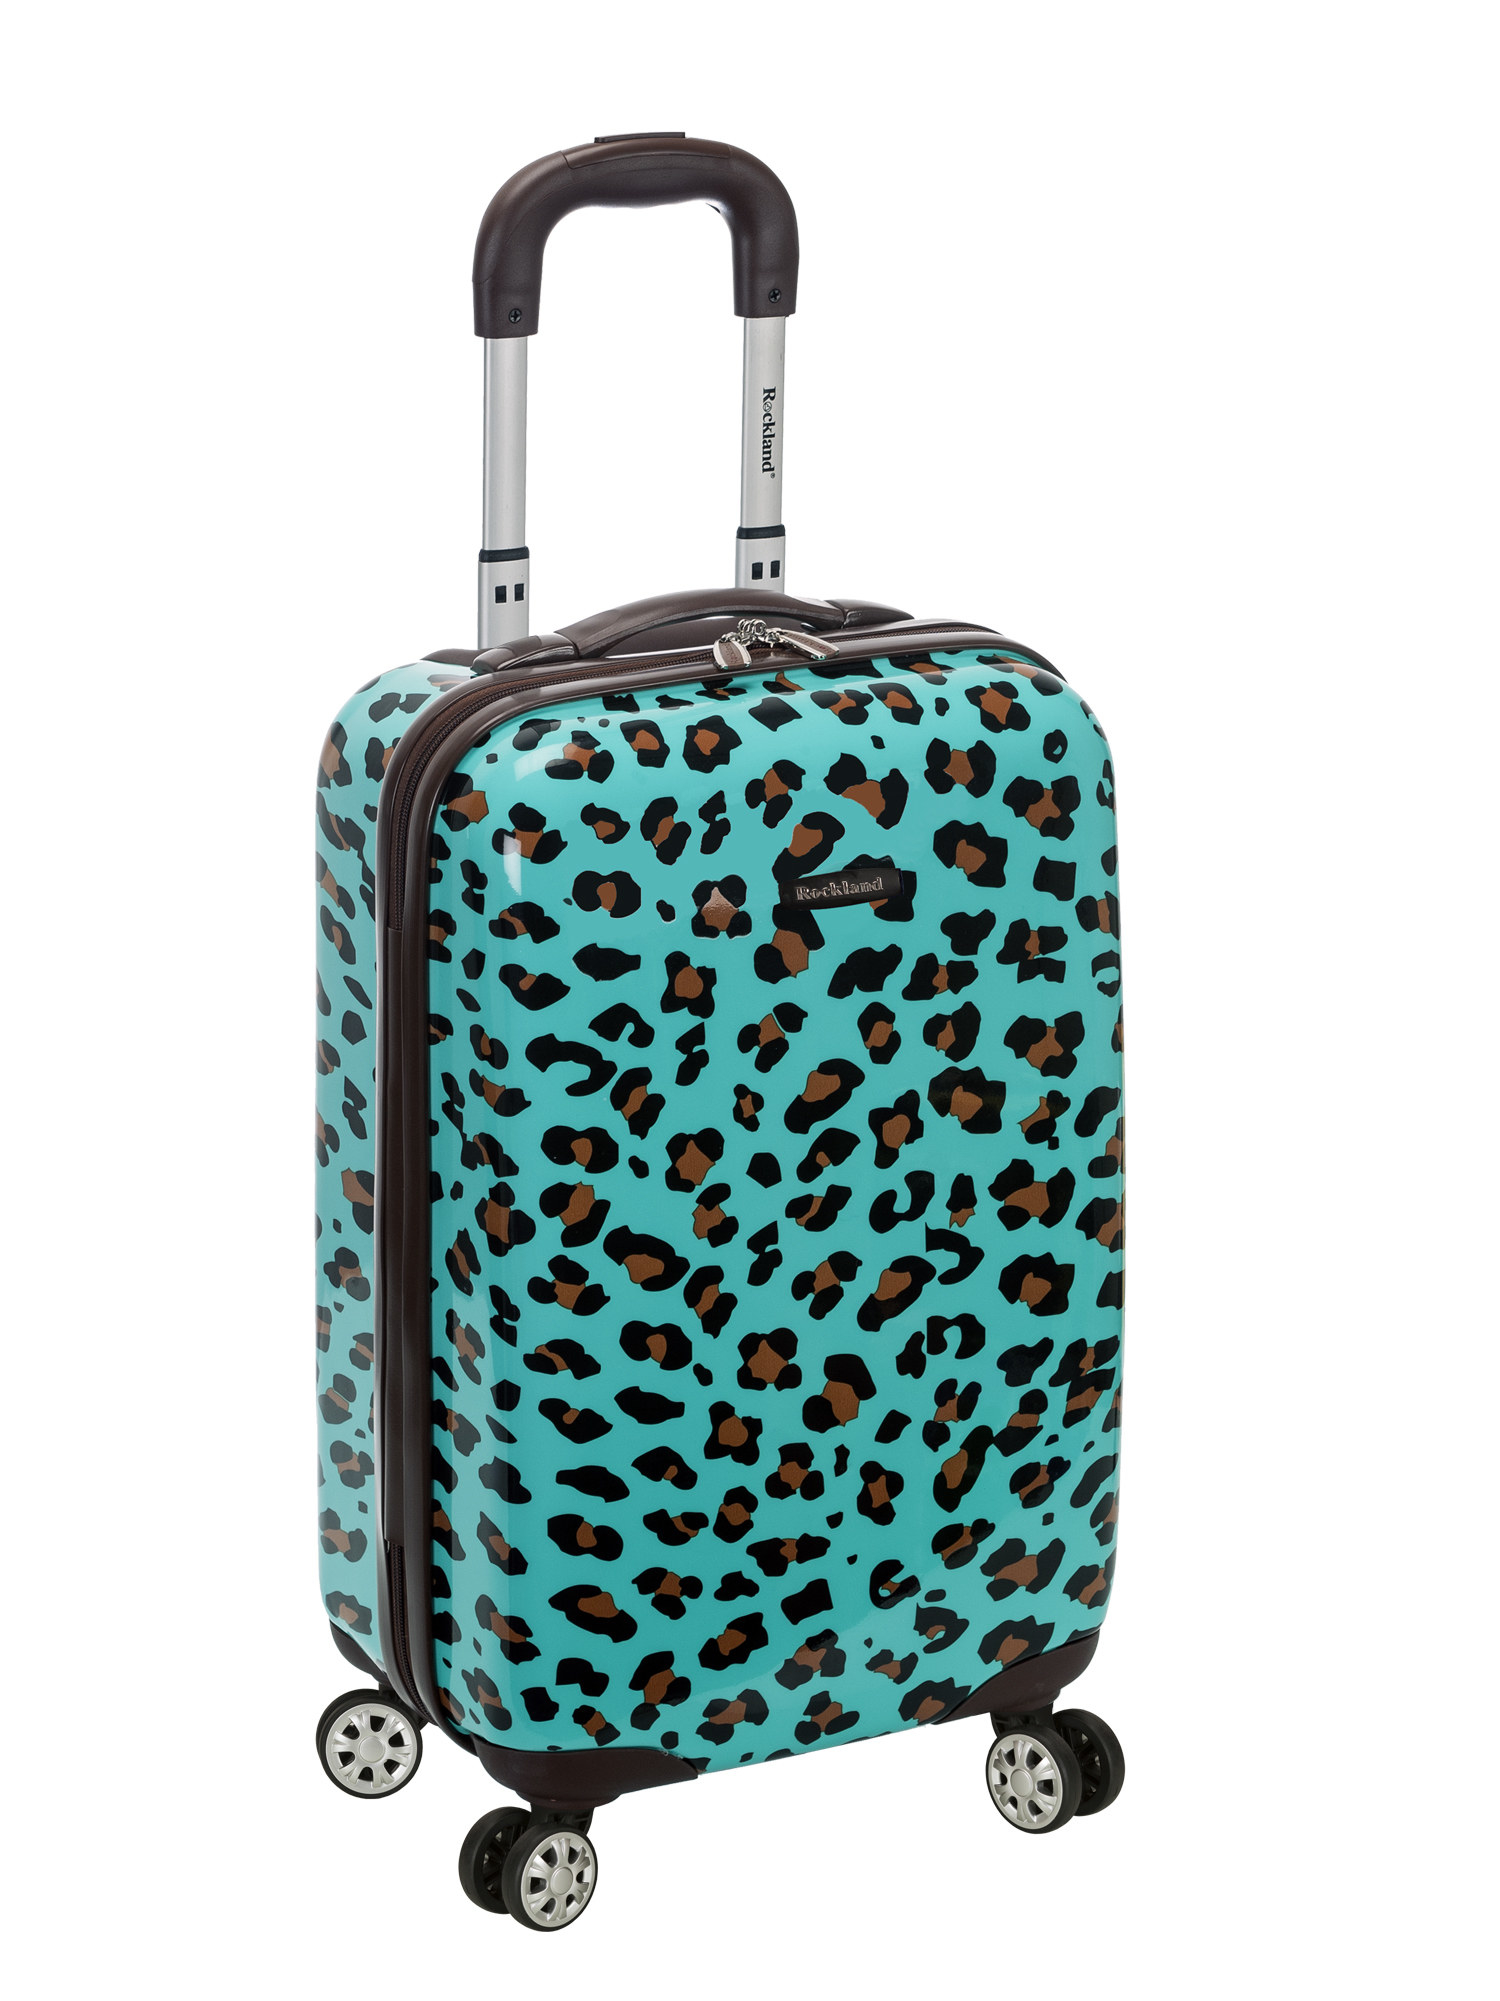 An image of a hard-sided spinner suitcase with a blue leopard print